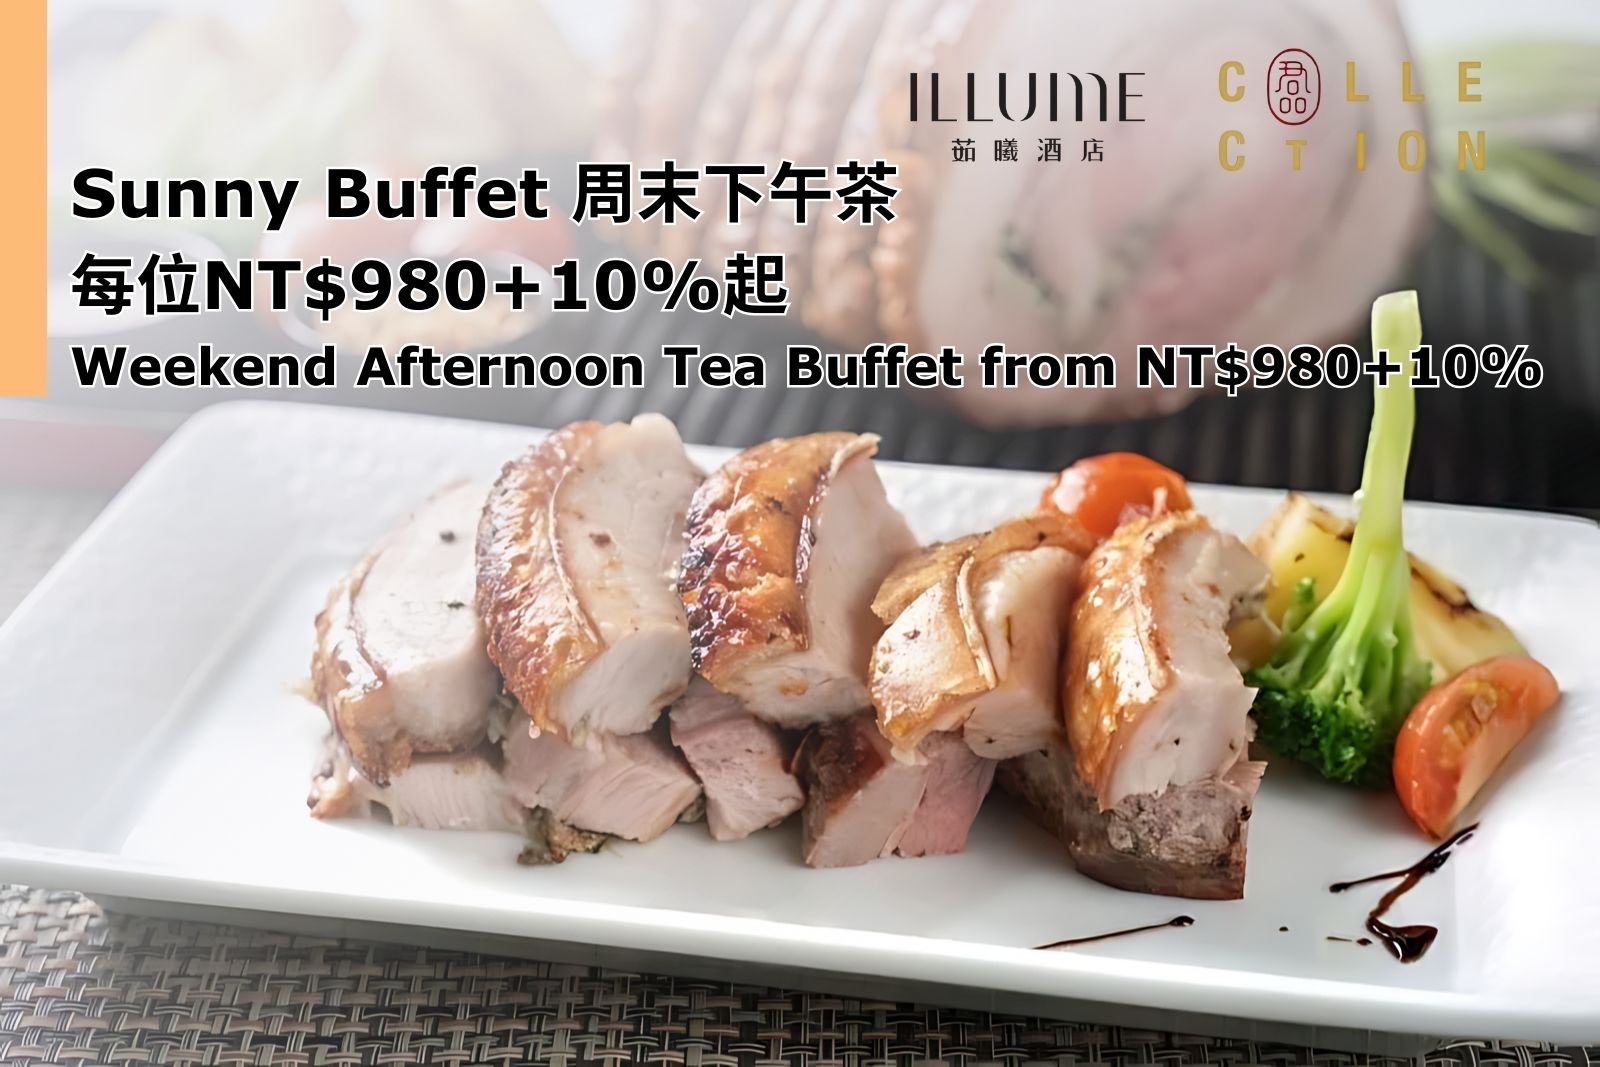 Indulge in relaxation, experience our Weekend Afternoon Tea Buffet from just NT$980+10%